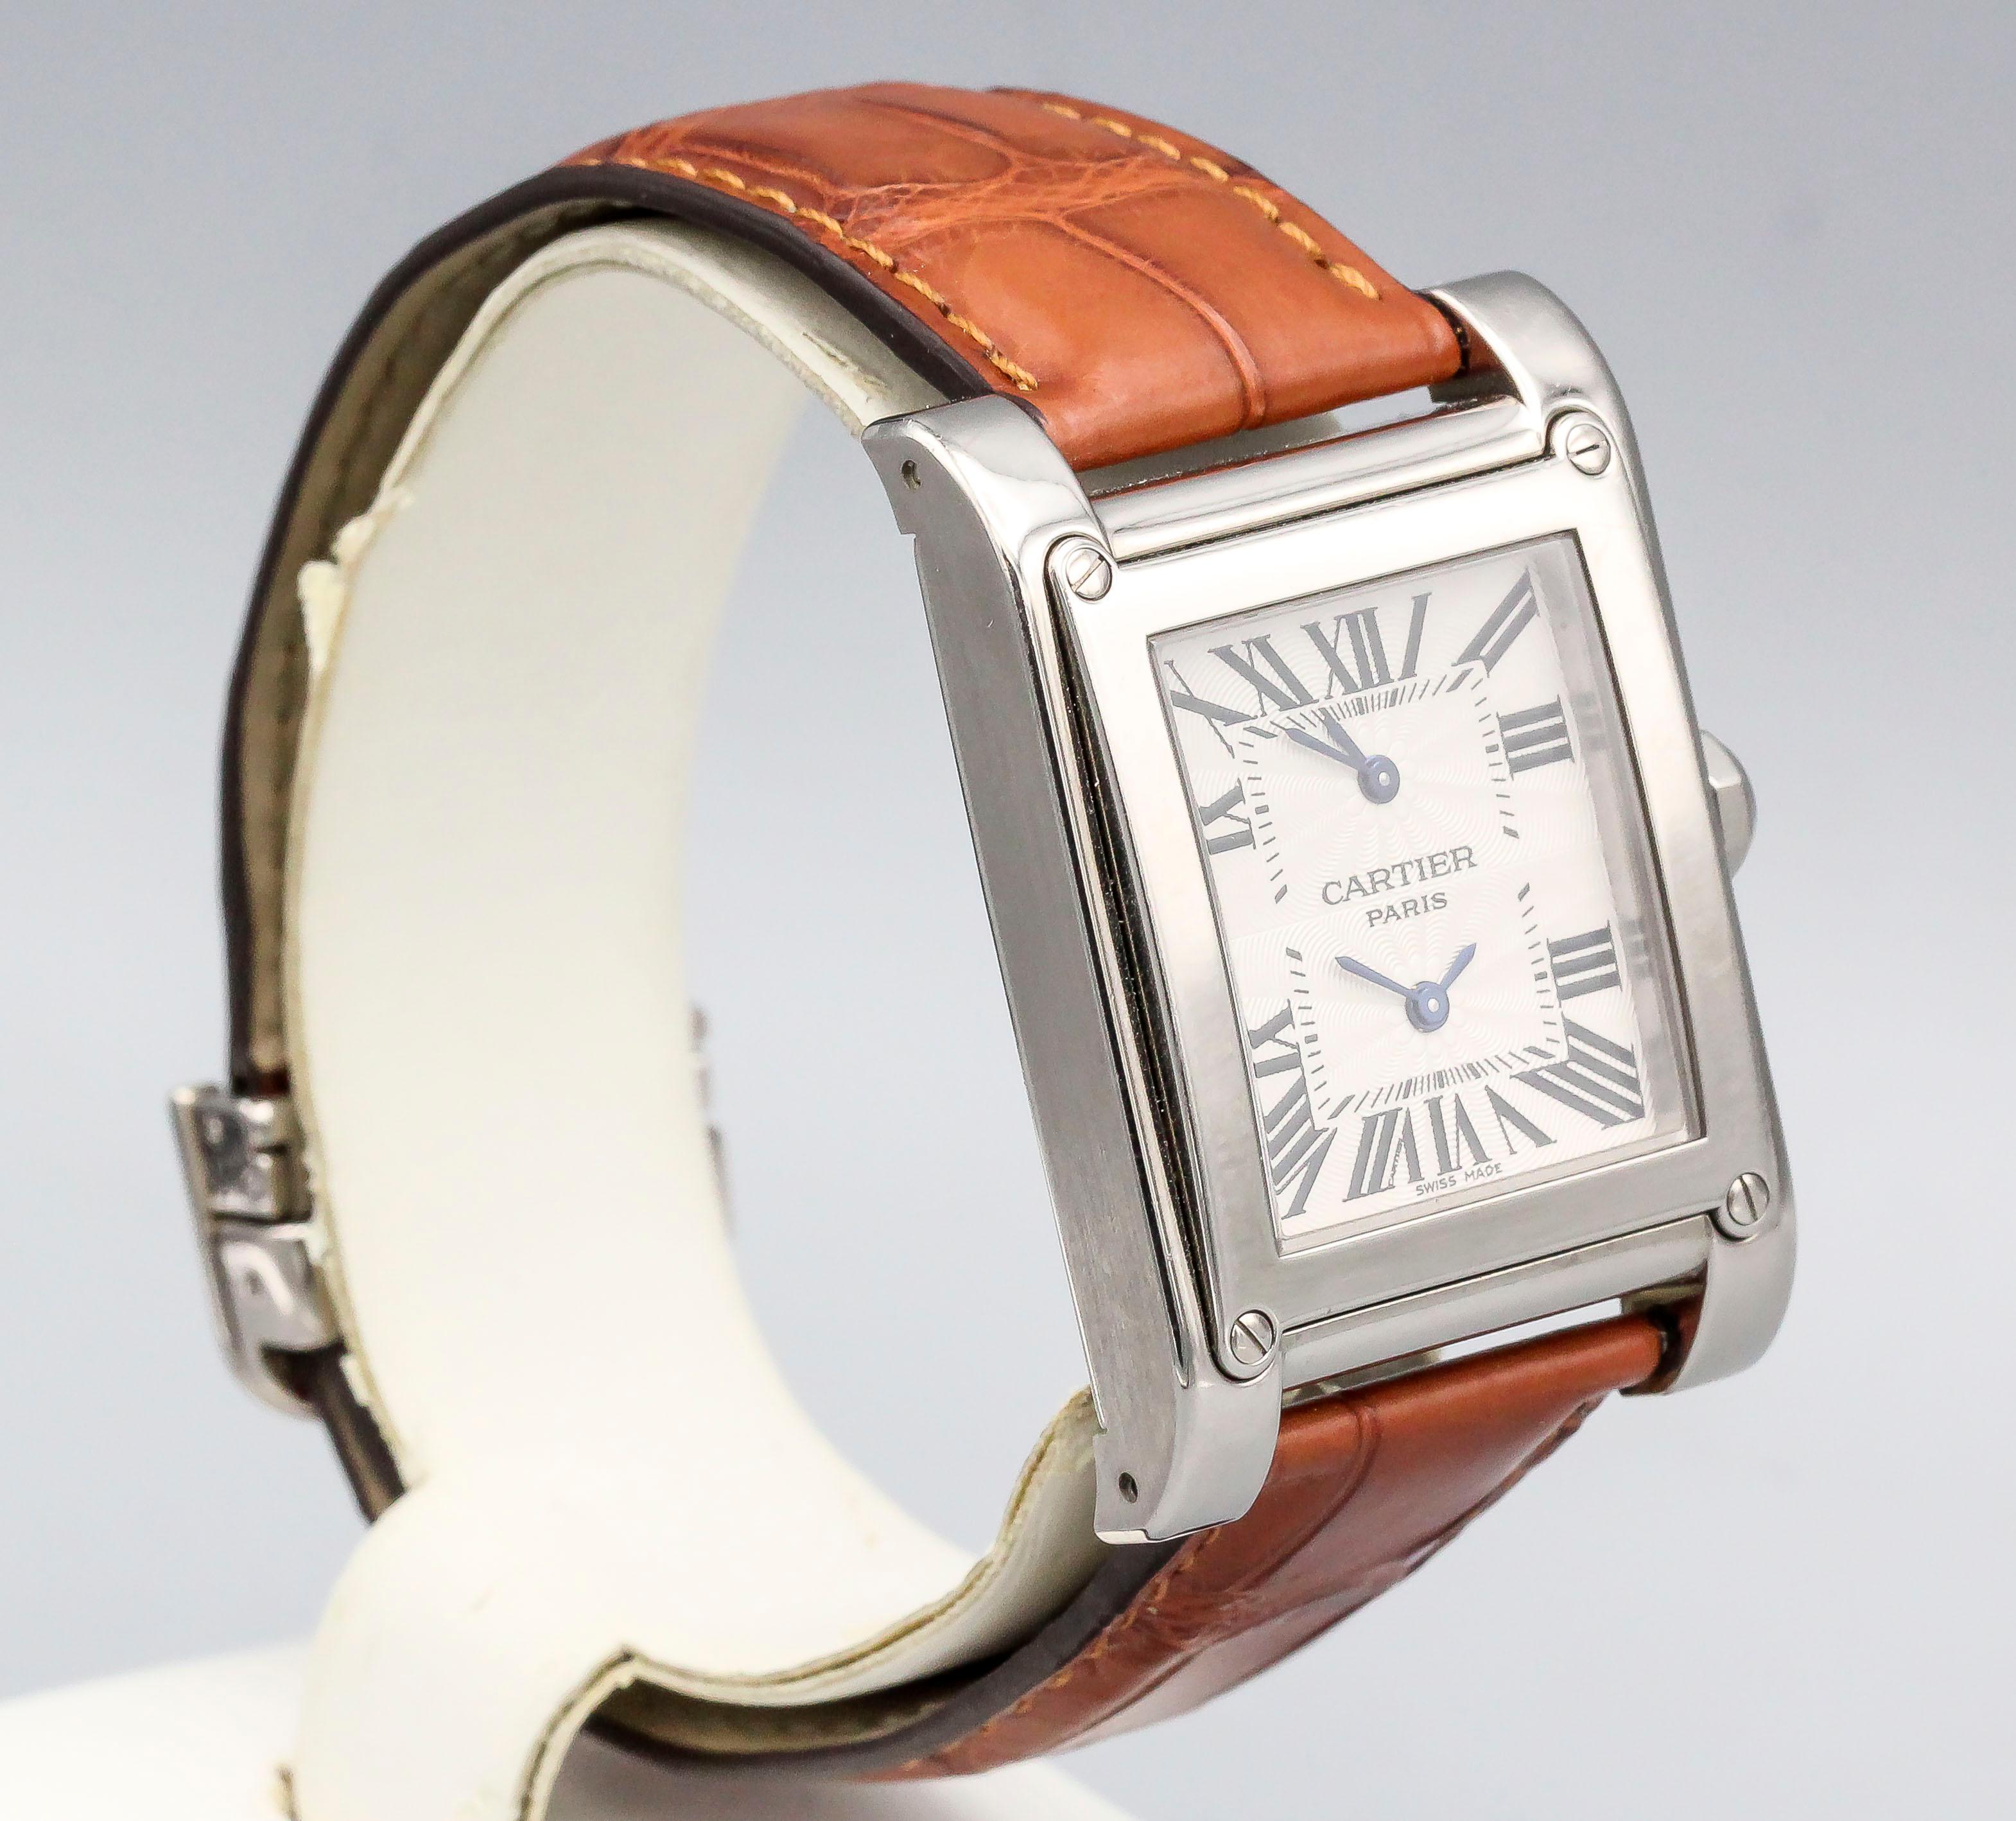 Rare and unusual 18K white gold wristwatch from the 